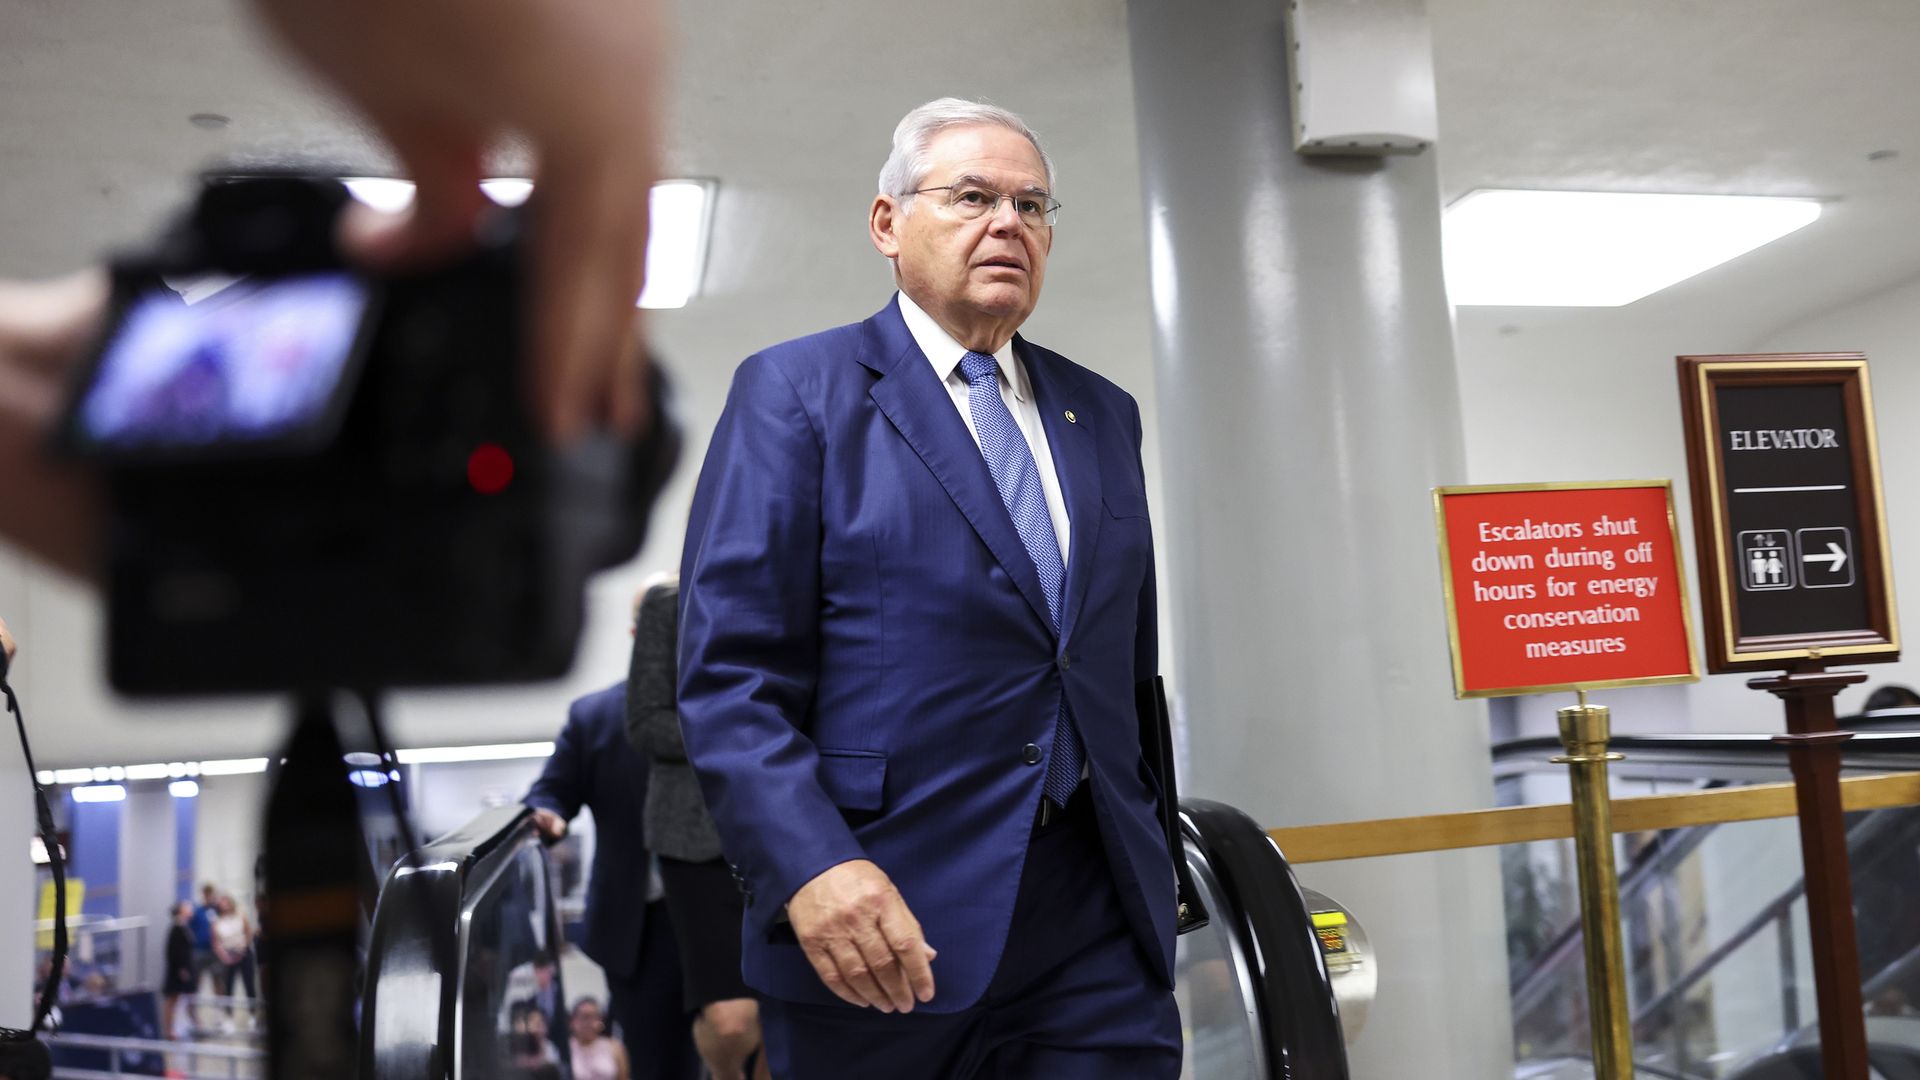 U.S. Sen. Bob Menendez (D-NJ), Chairman of the Senate Foreign Relations Committee, makes his way to the Senate Chambers at the U.S. Capitol on August 03, 2022